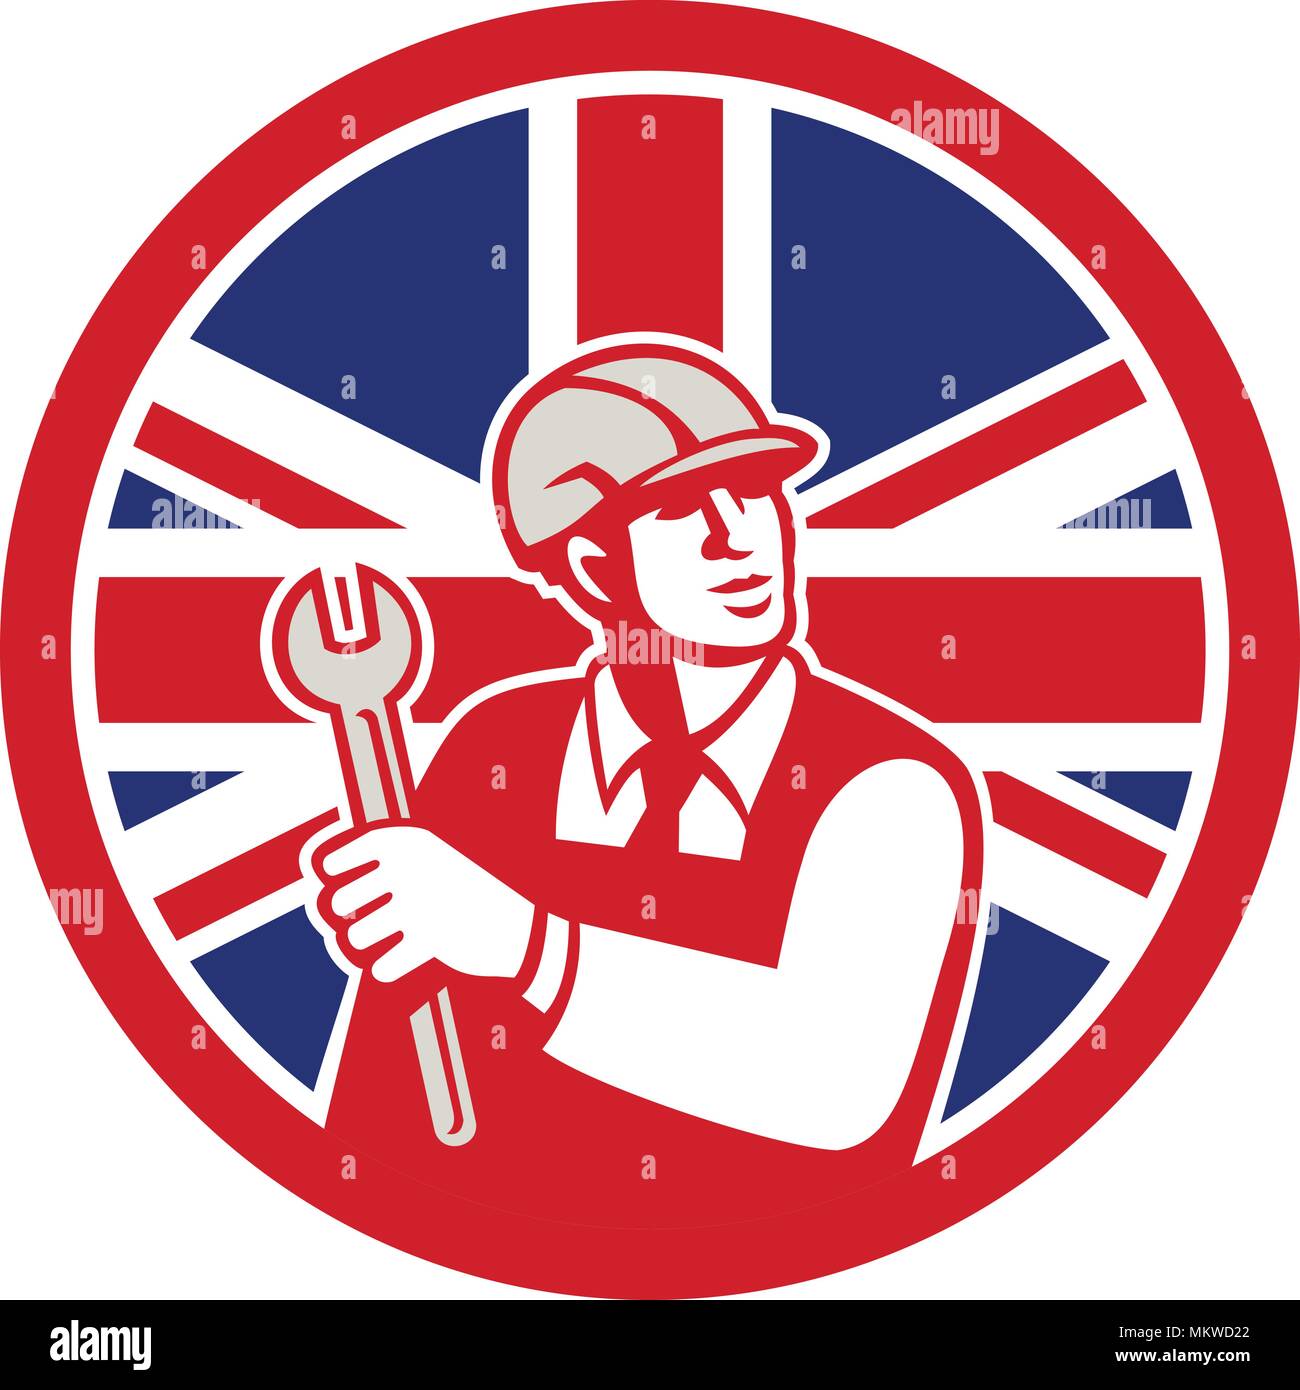 Icon retro style illustration of a British mechanical engineer holding a spanner or wrench with United Kingdom UK, Great Britain Union Jack flag set i Stock Vector